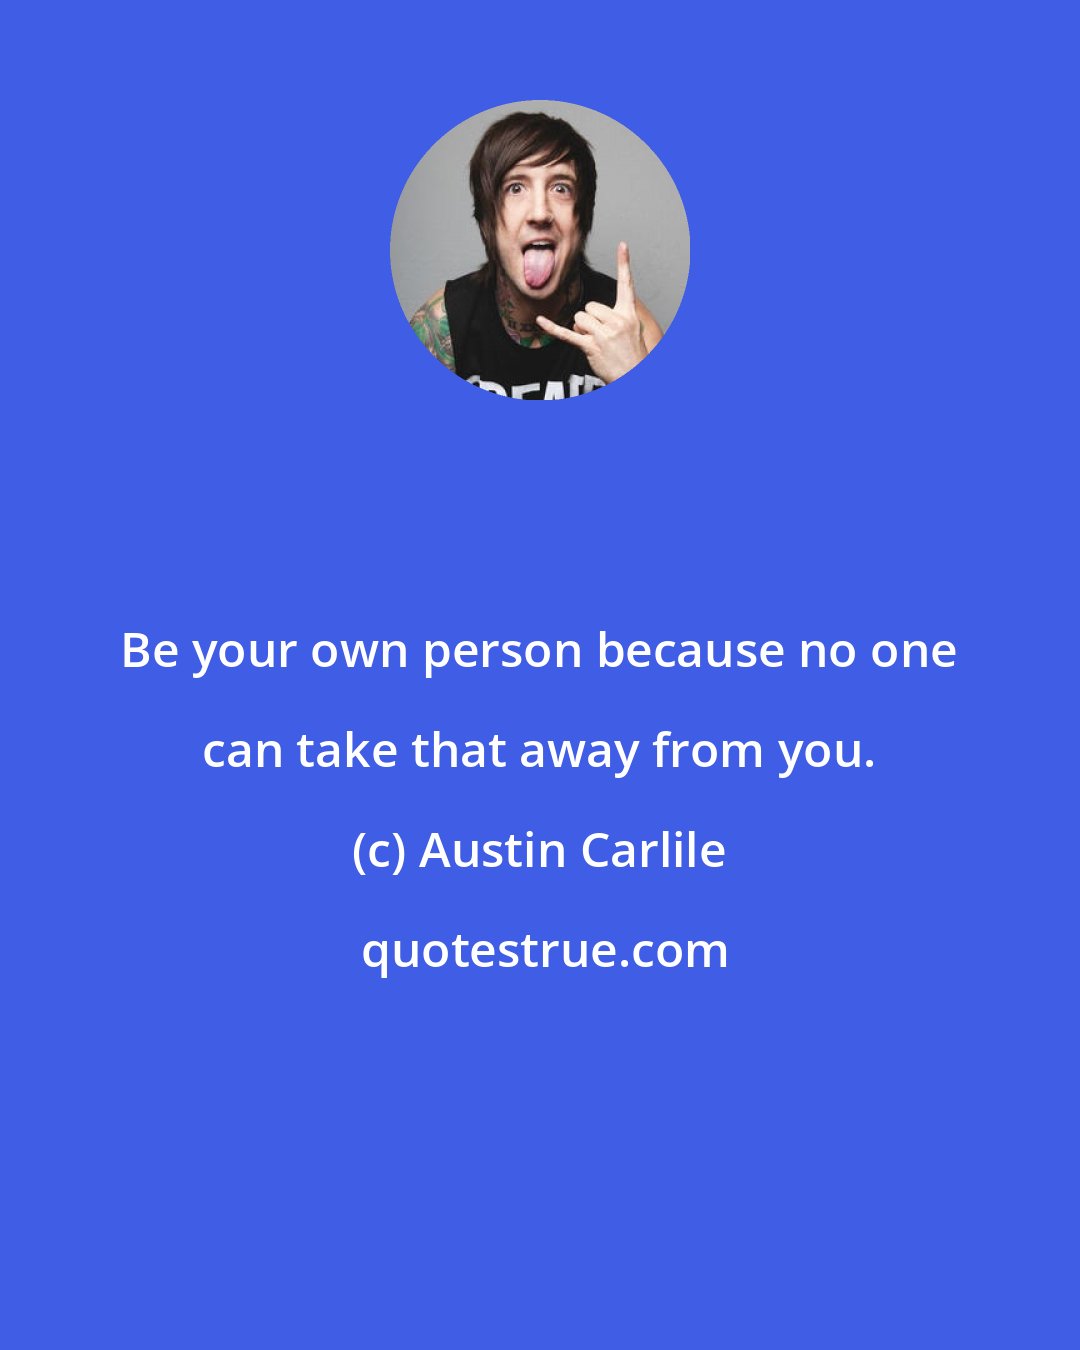 Austin Carlile: Be your own person because no one can take that away from you.